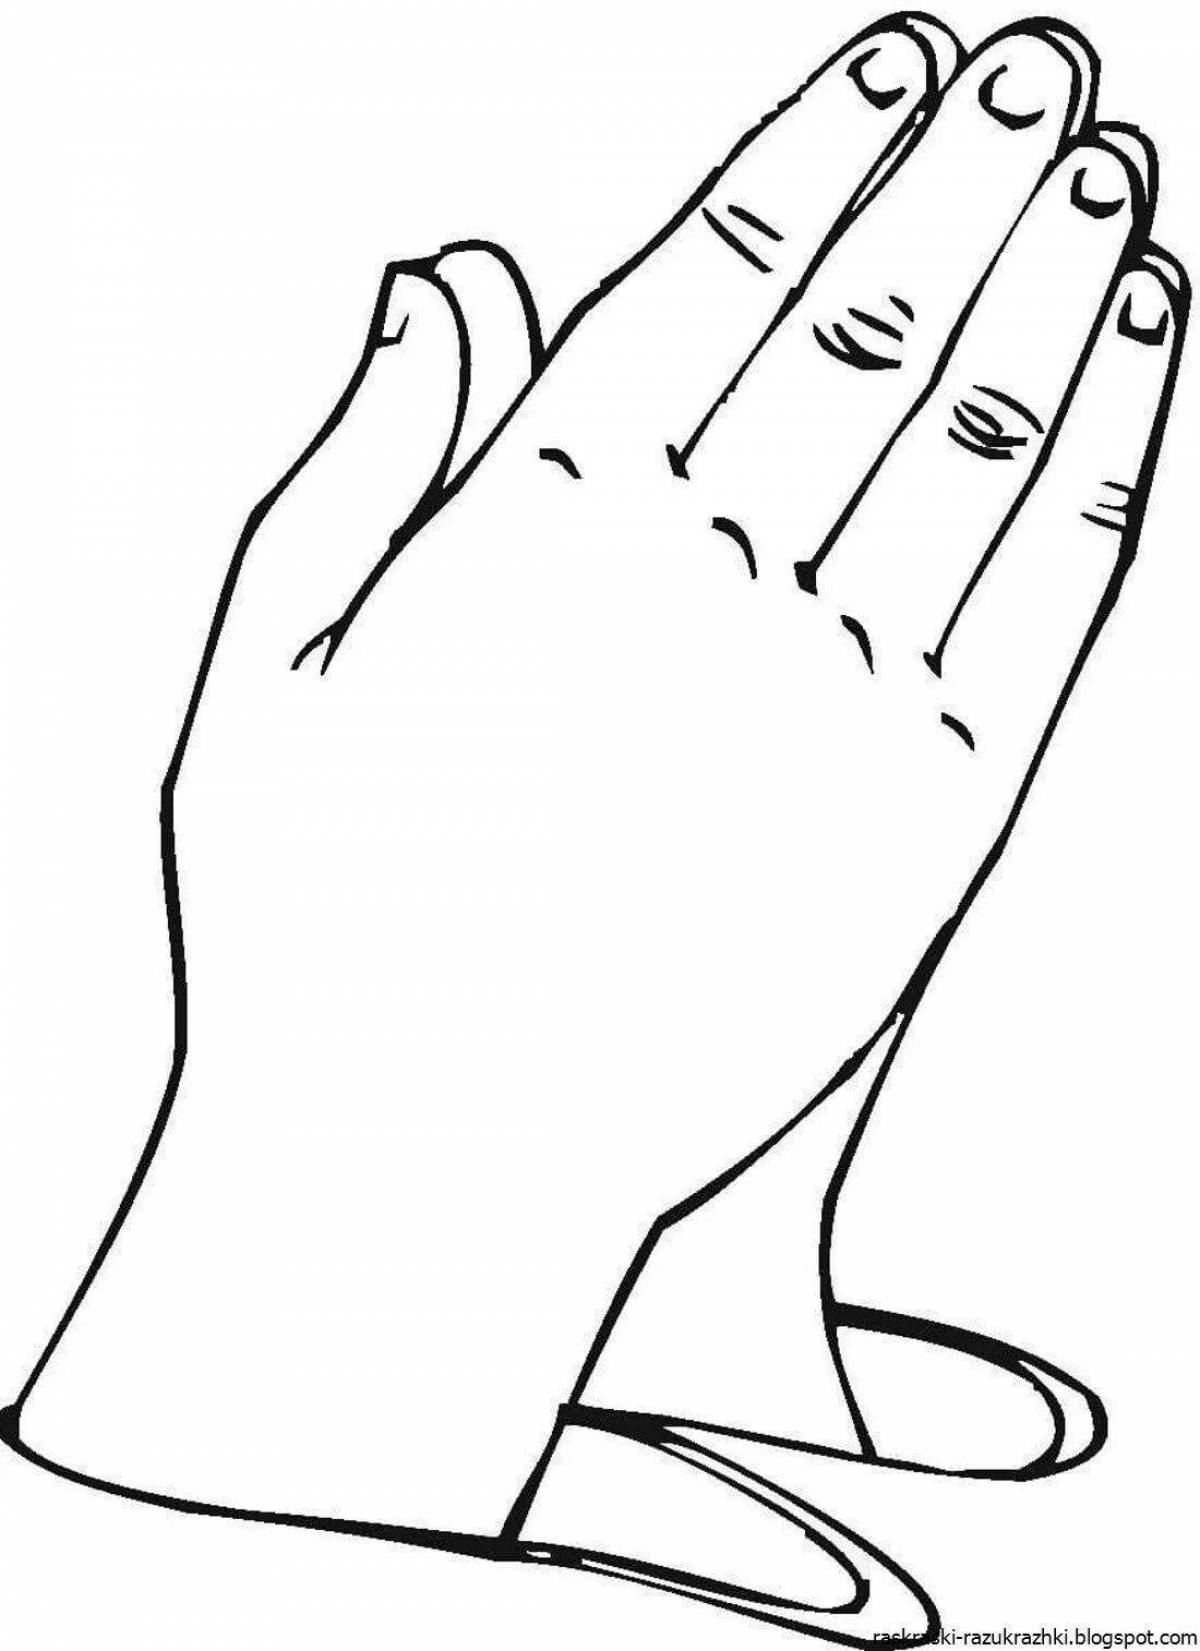 Adorable wrist coloring page